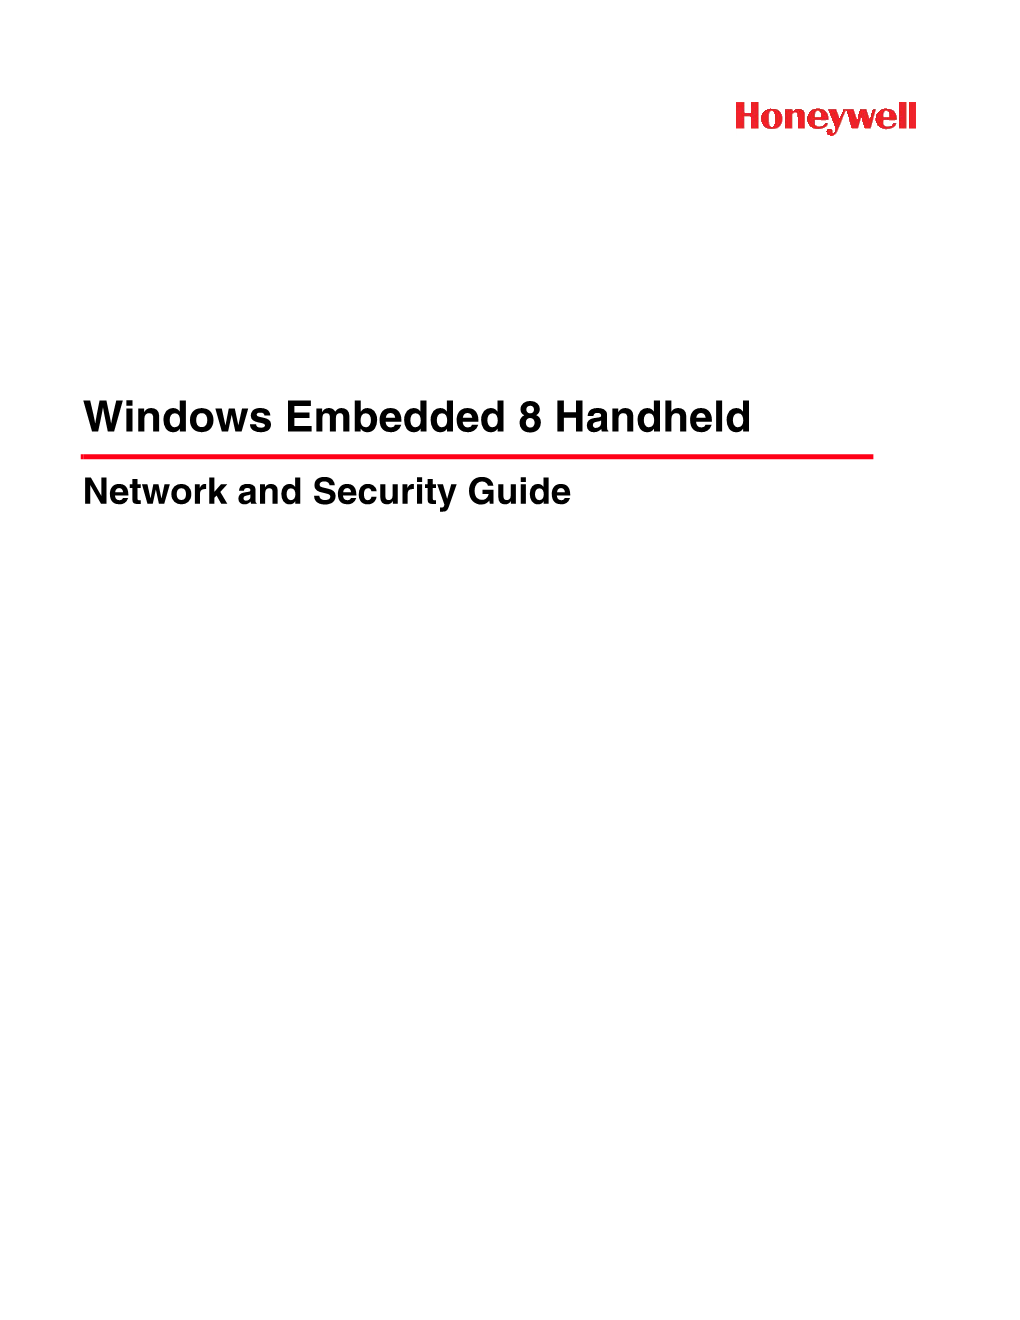 Windows Embedded 8 Handheld Network and Security Guide Disclaimer